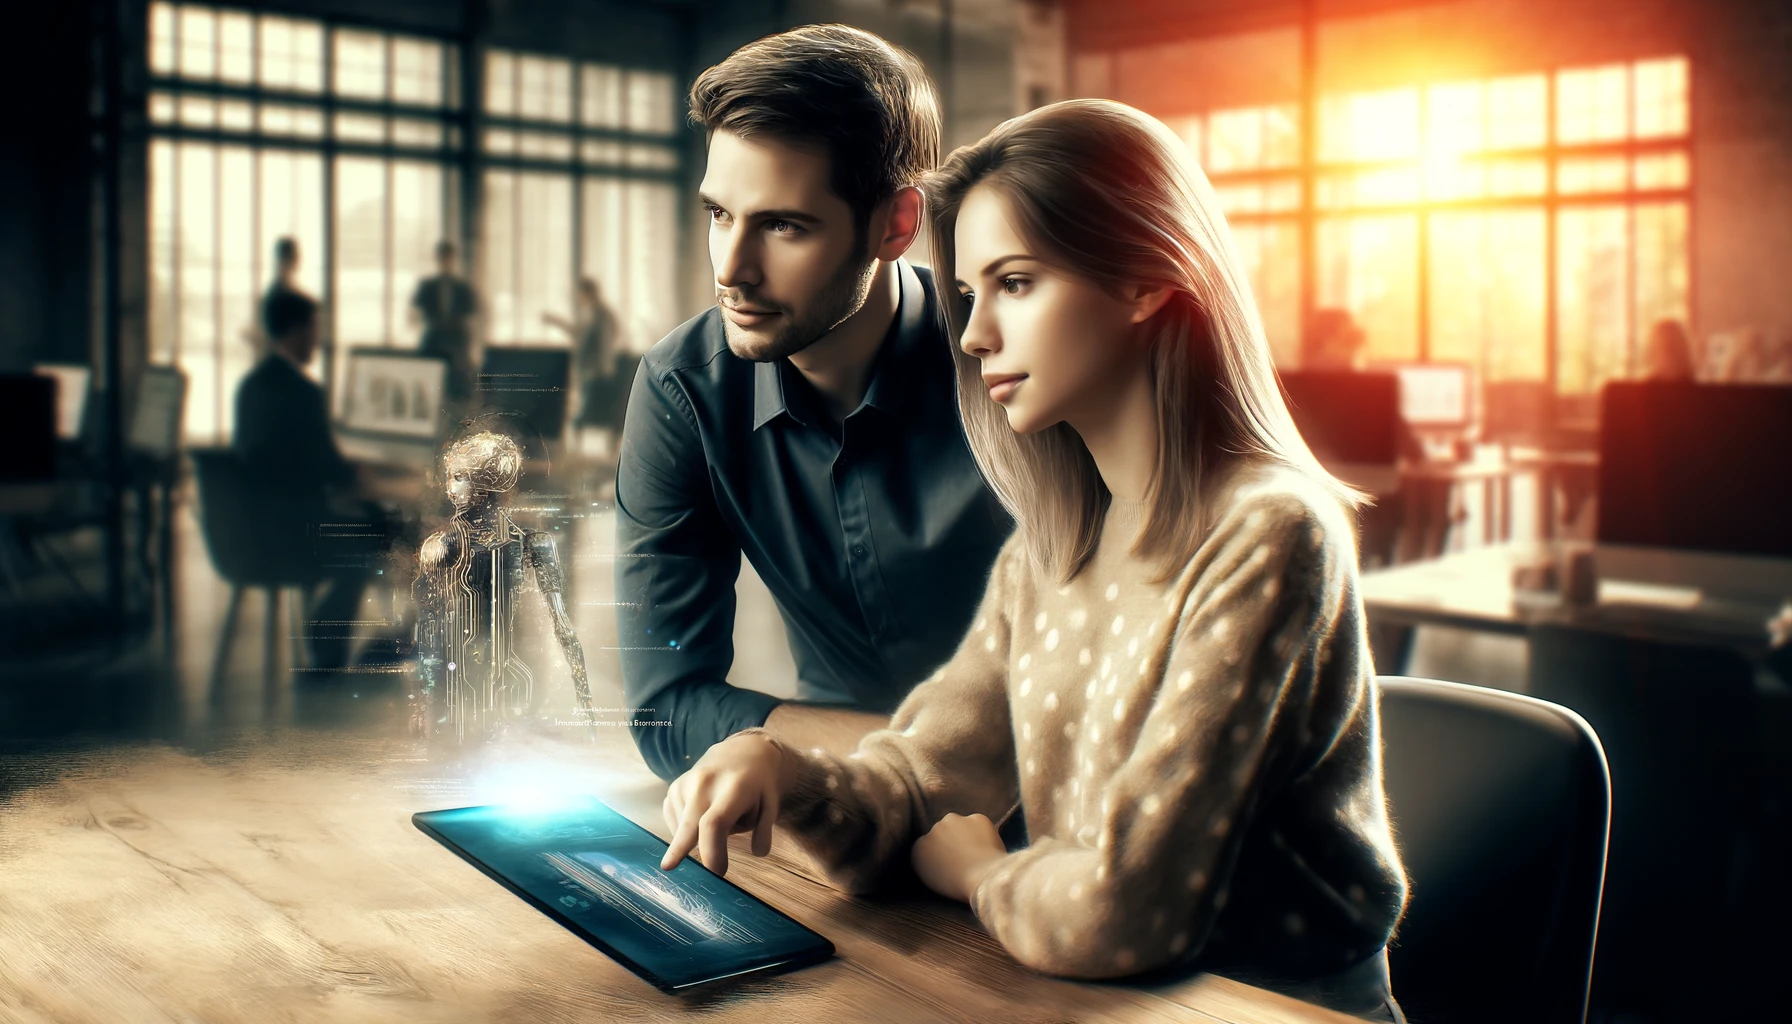 This illustration features two professionals, a man and a woman, collaborating over a digital tablet in a modern office environment.